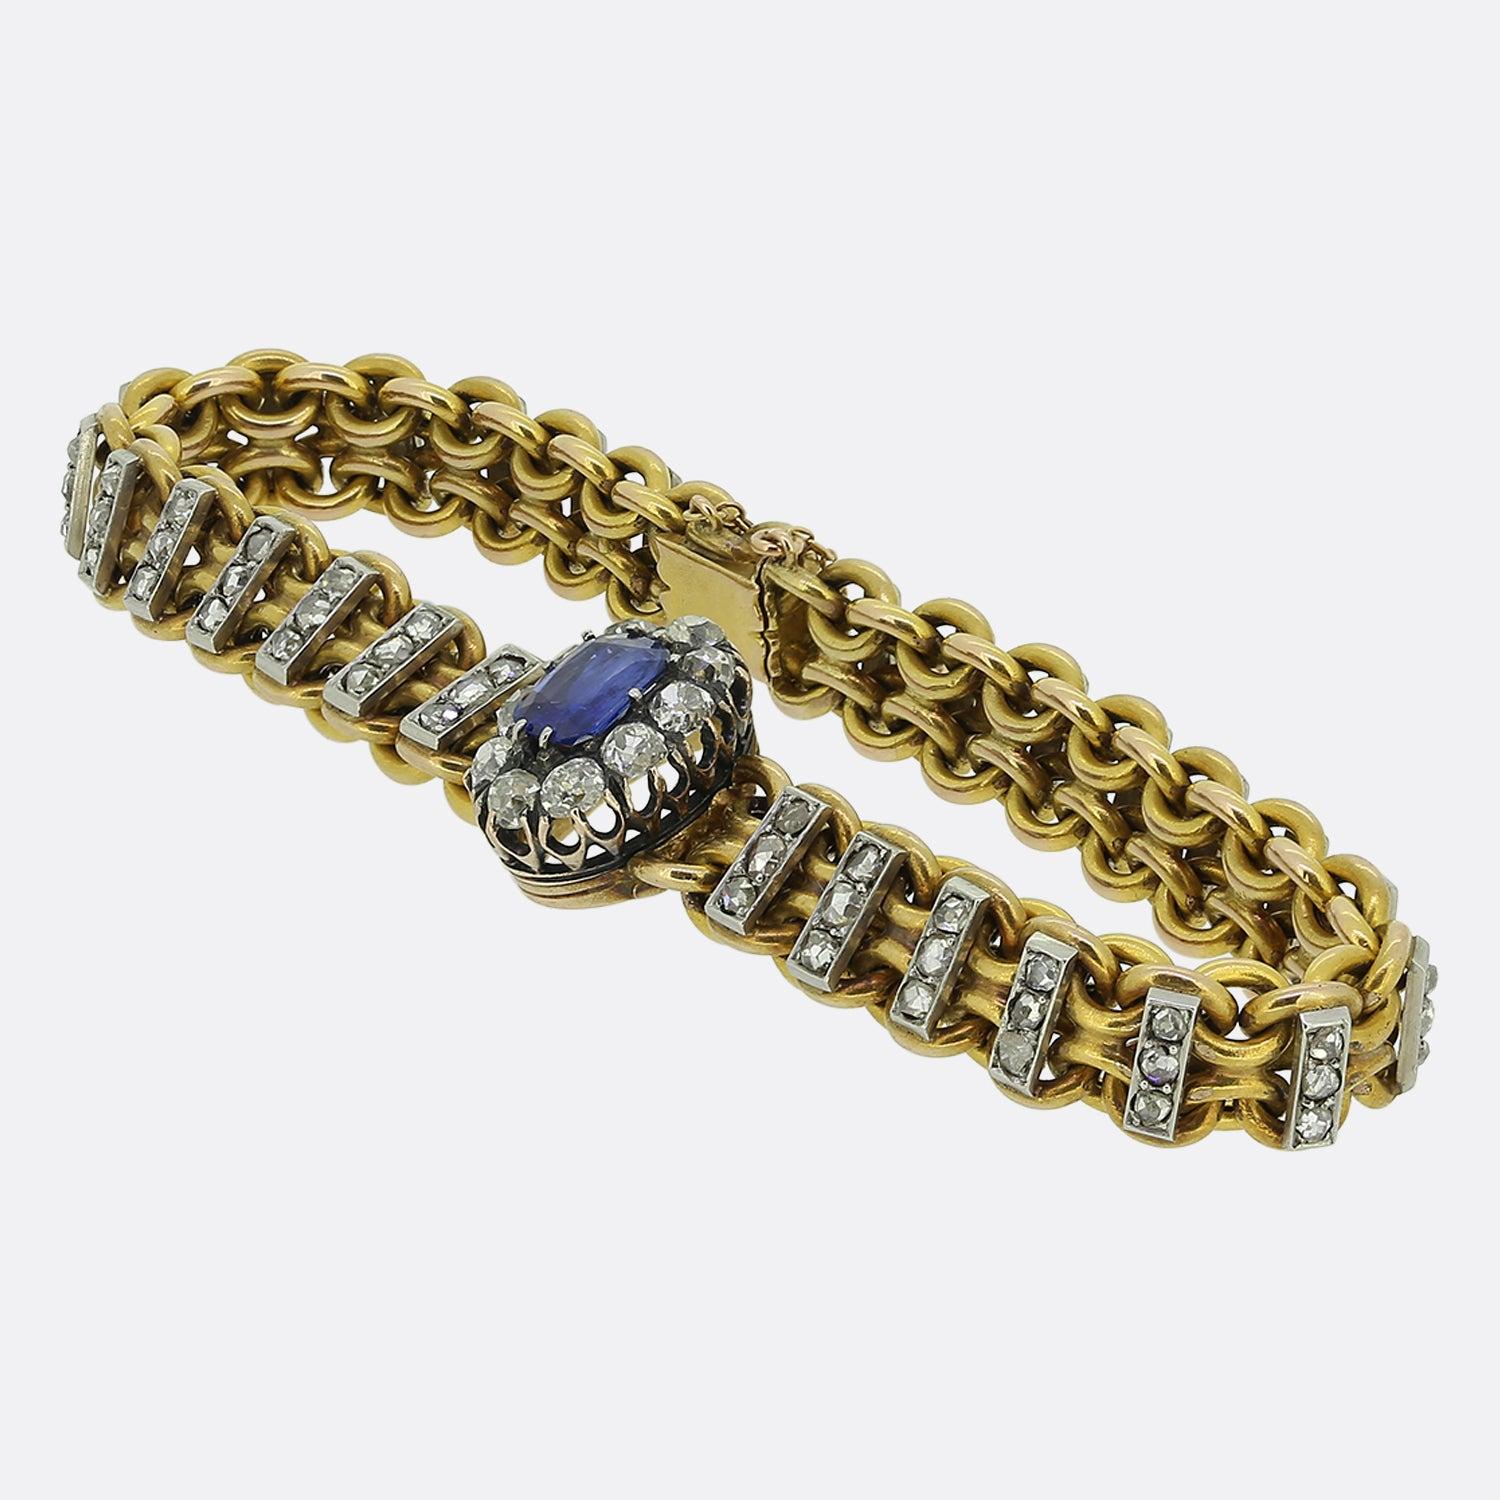 Here we have a gorgeous antique sapphire and diamond chain bracelet. This French piece has been crafted from 18ct yellow gold a showcases a unique chain design with every other connecting link being set with a trio of old cut diamonds in a vertical